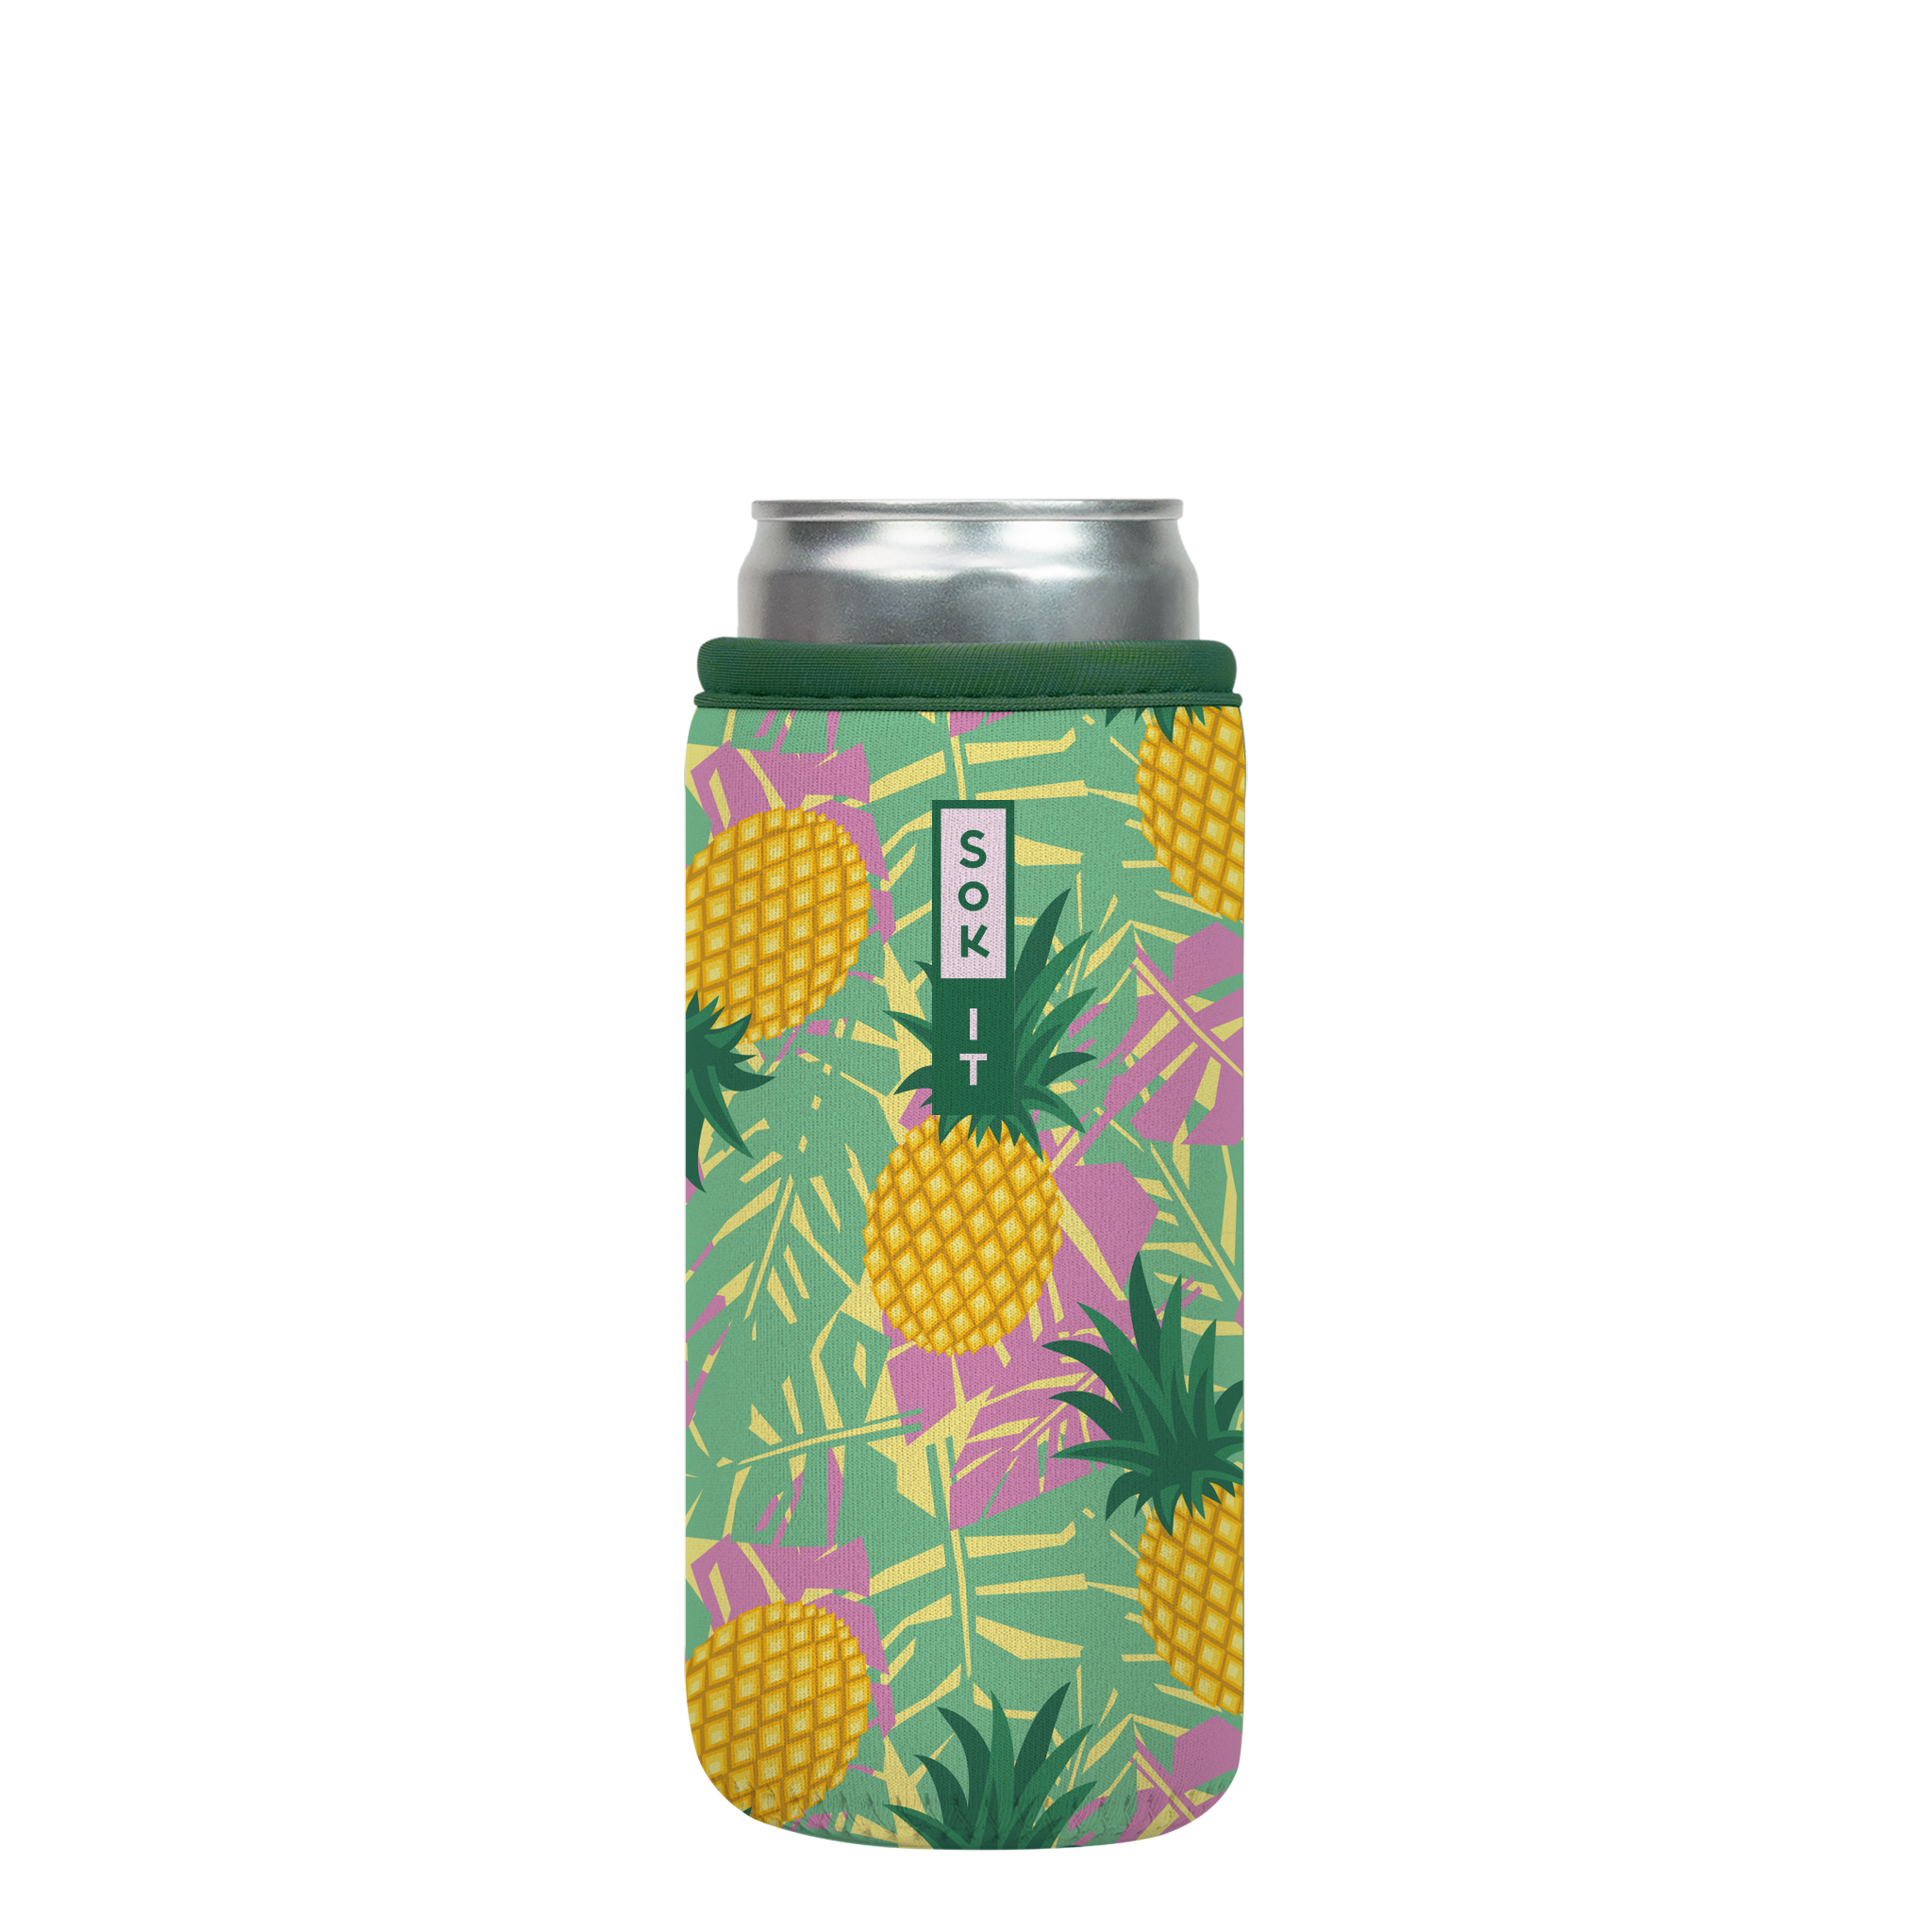 CanSok - Pineapple Paradise